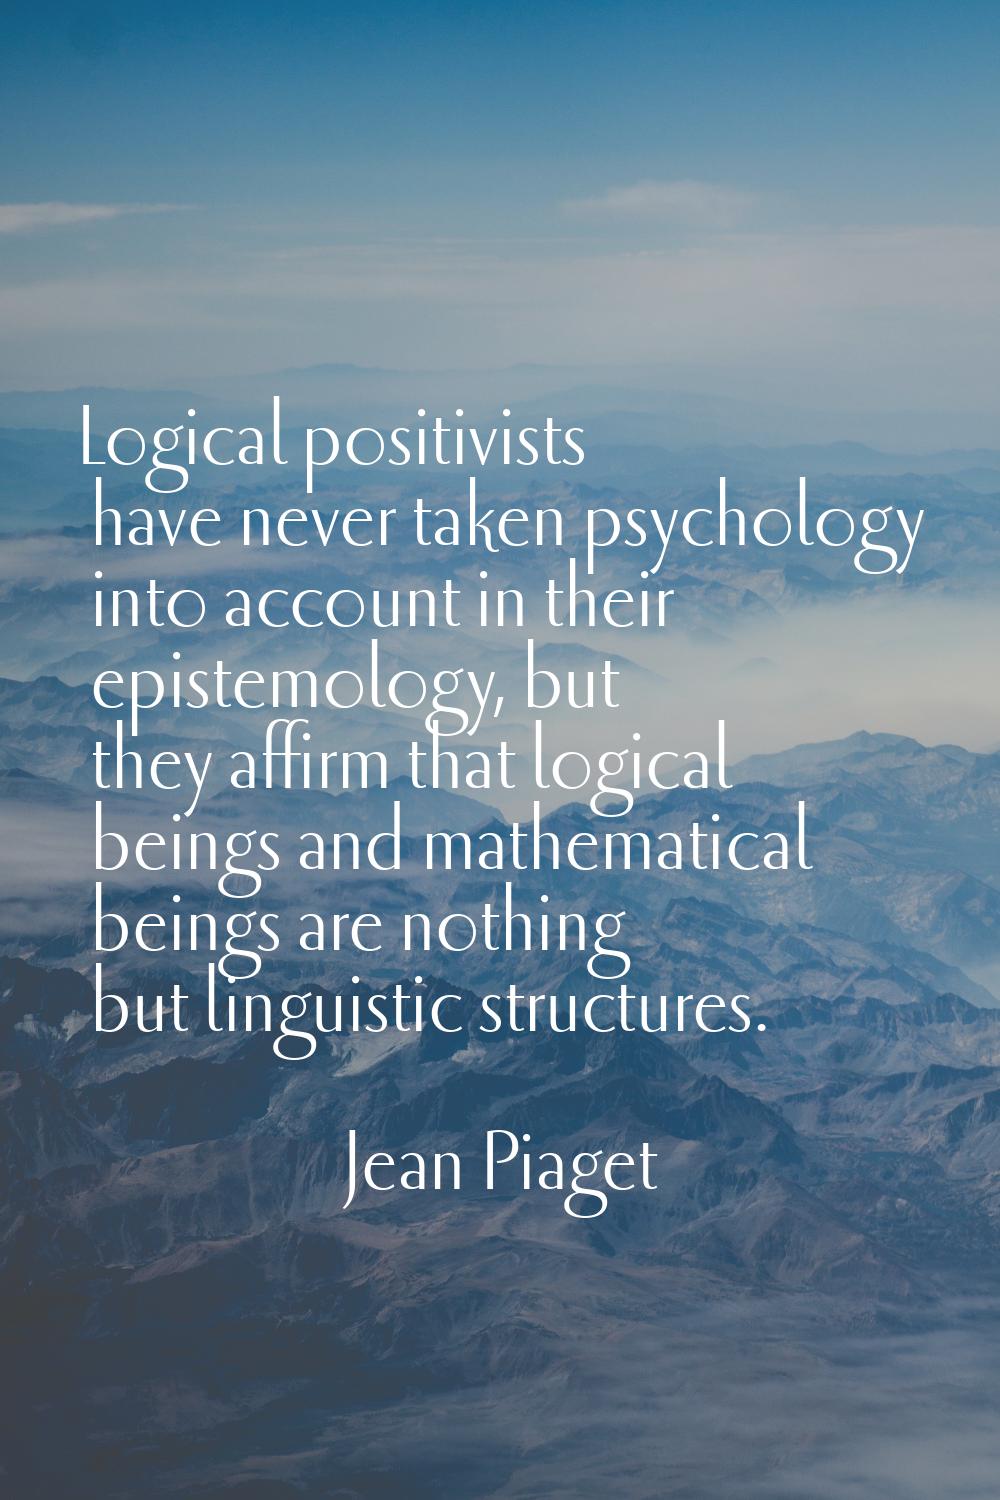 Logical positivists have never taken psychology into account in their epistemology, but they affirm